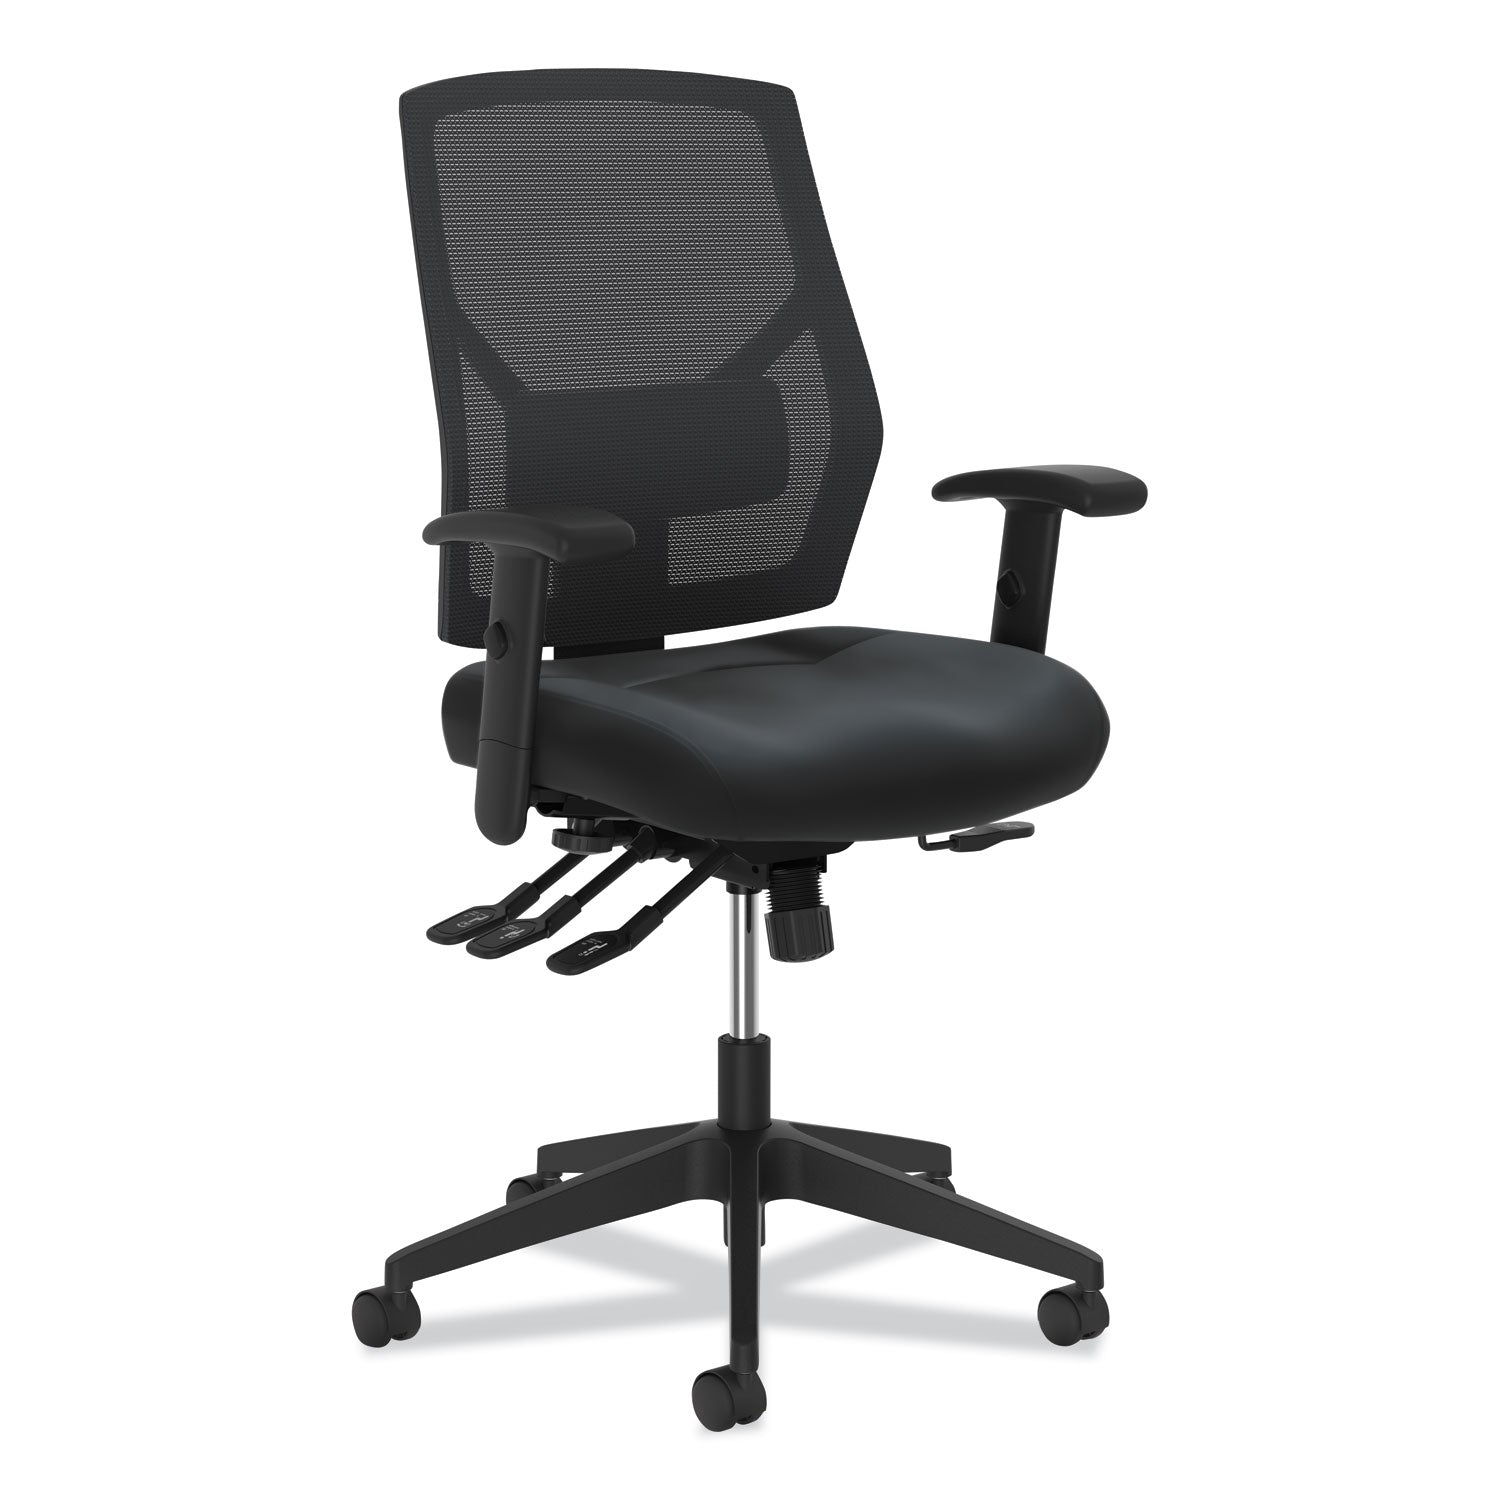 crio-high-back-task-chair-with-asynchronous-control-supports-up-to-250-lb-18-to-22-seat-height-black_bsxvl582sb11t - 1